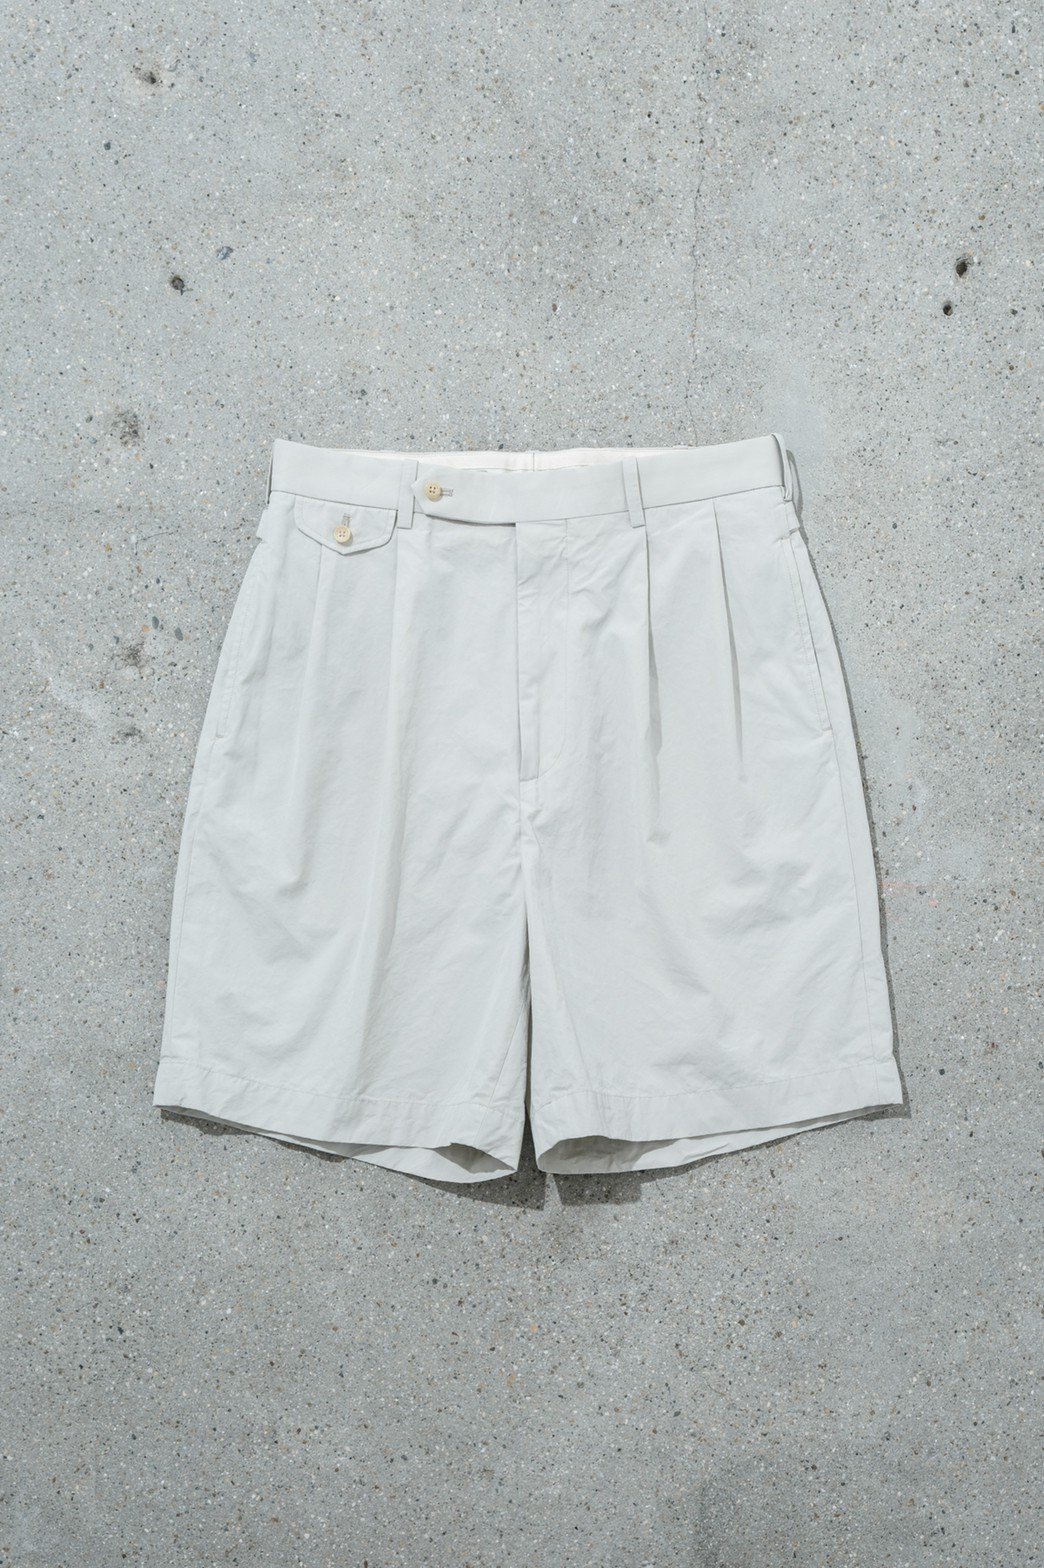 A.PRESSE / High Density Weather Cloth Shorts